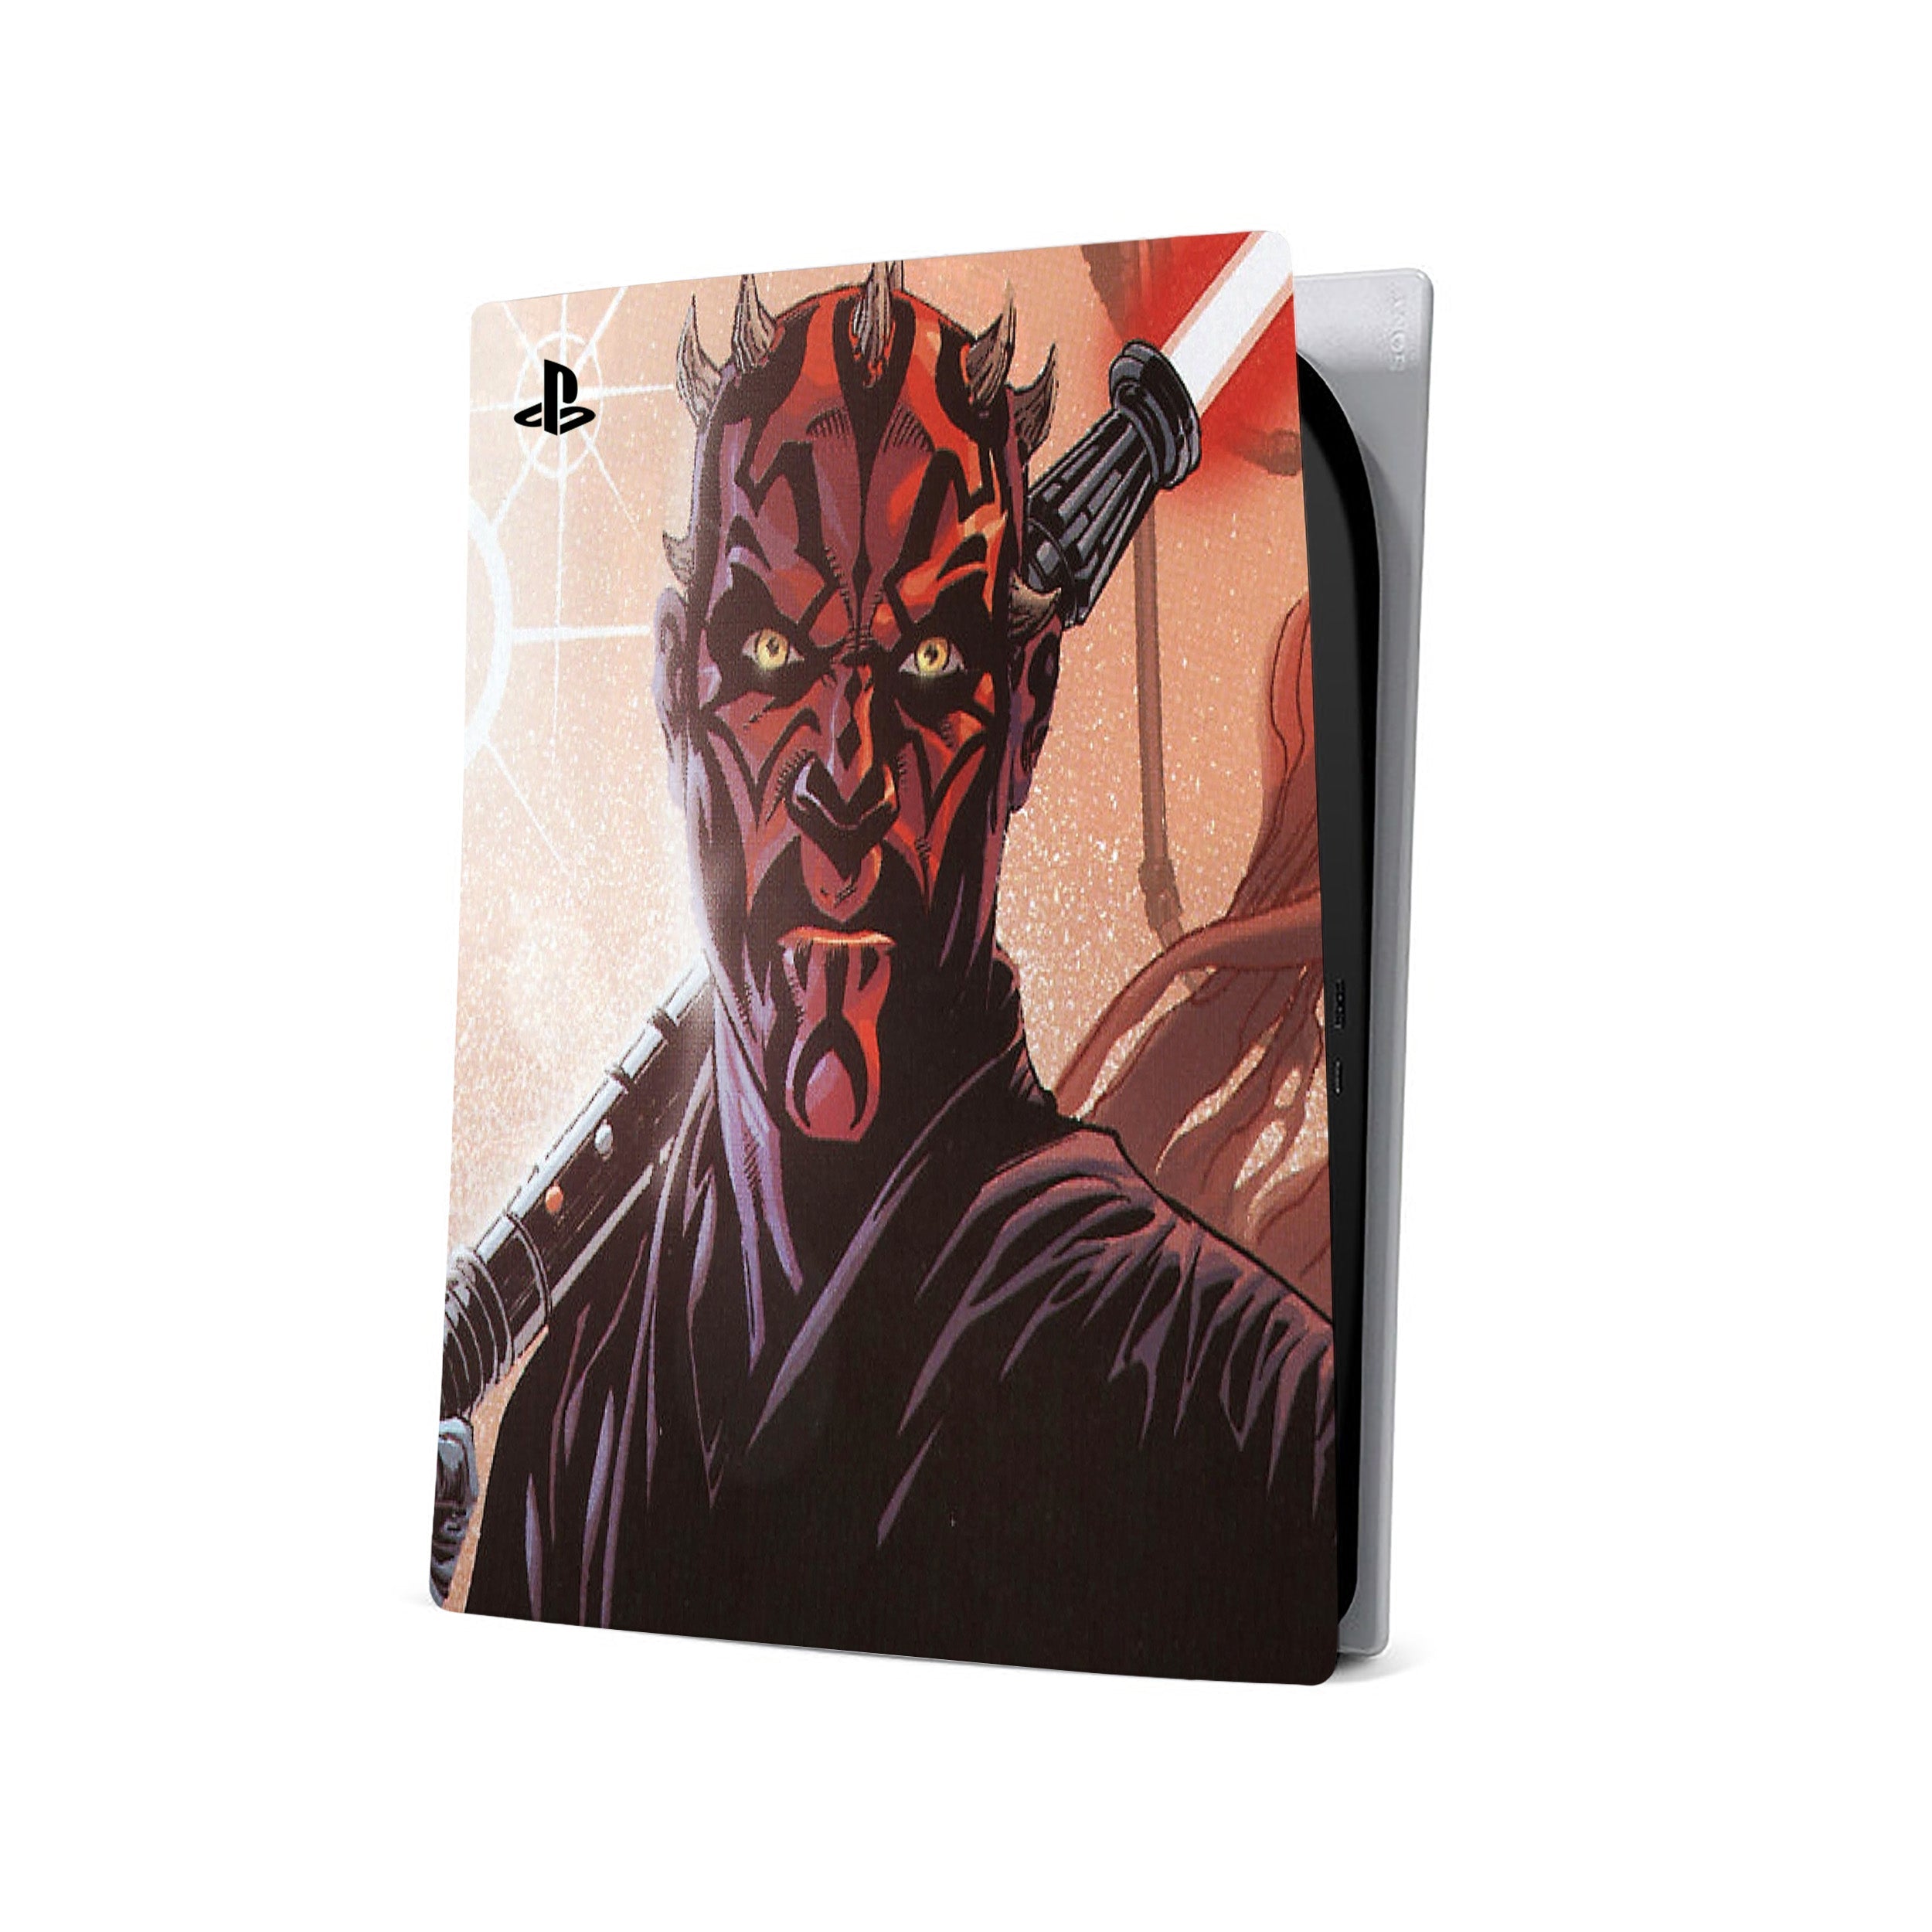 A video game skin featuring a Star Wars Darth Maul design for the PS5.